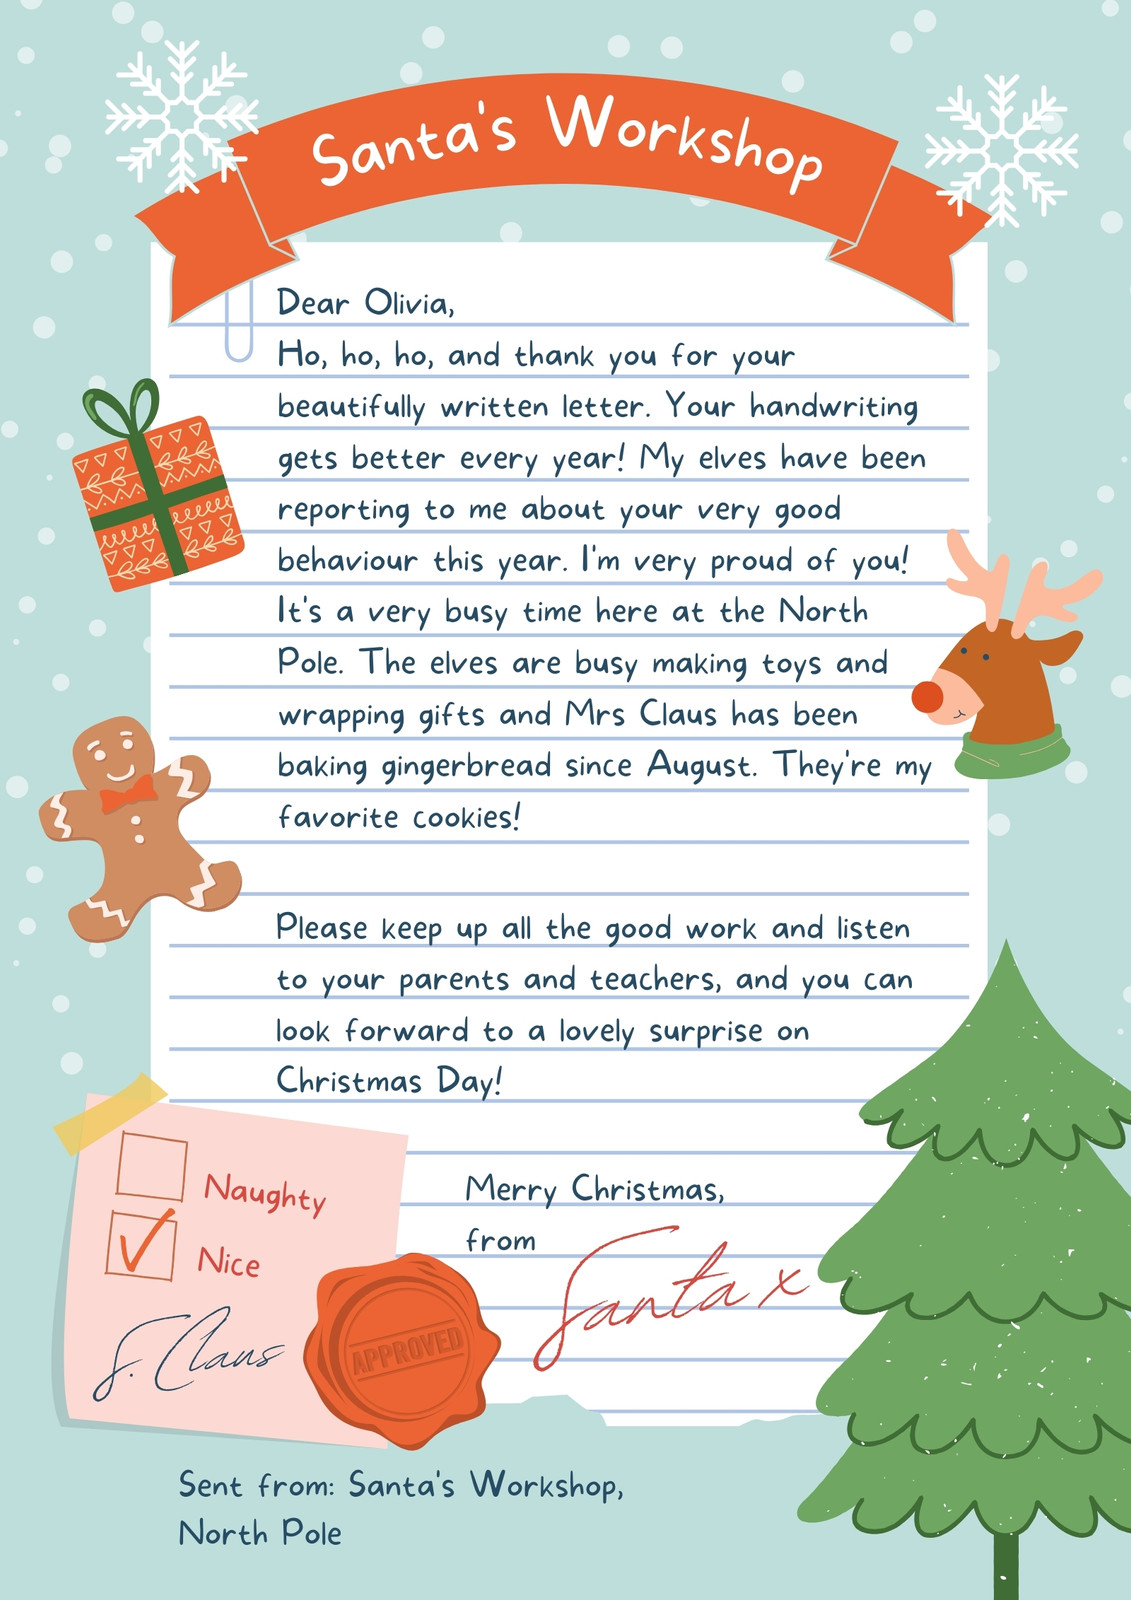 Friendly Letter Writing Template by Teach Simple